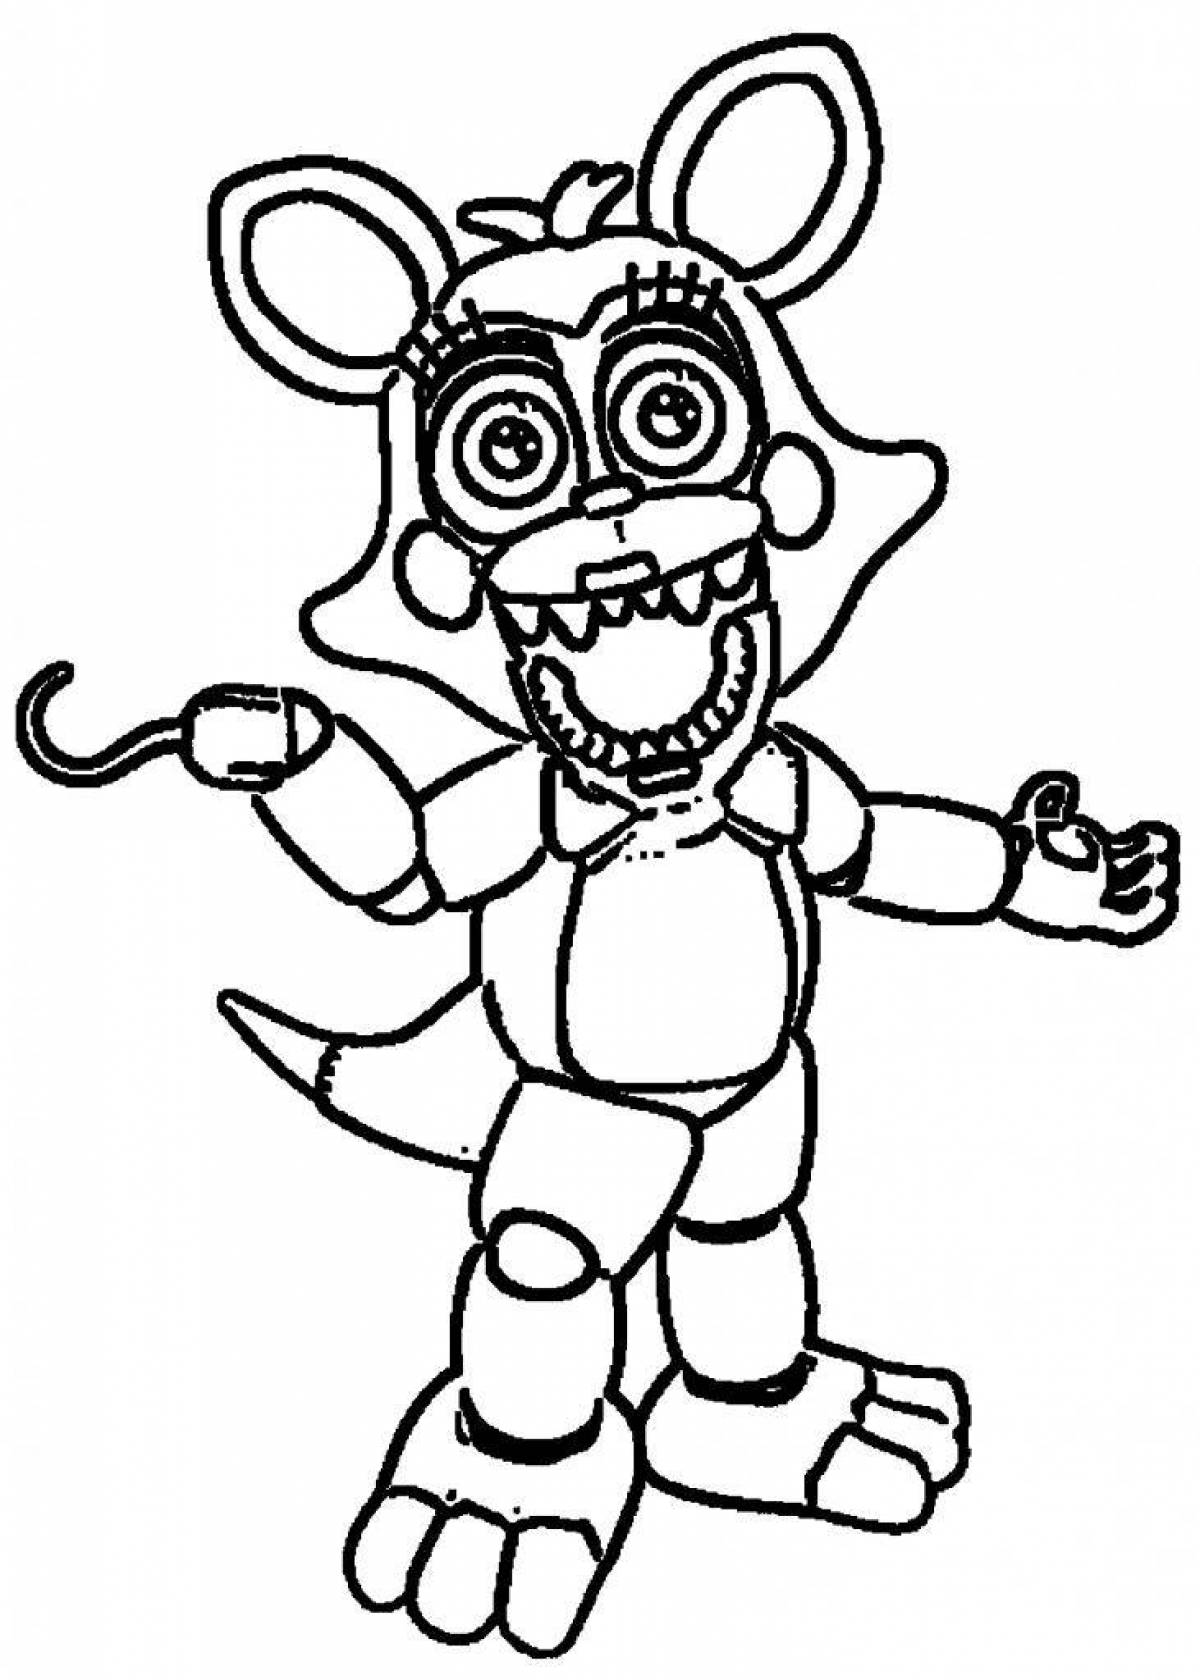 Freddy's shimmery glam rock coloring page